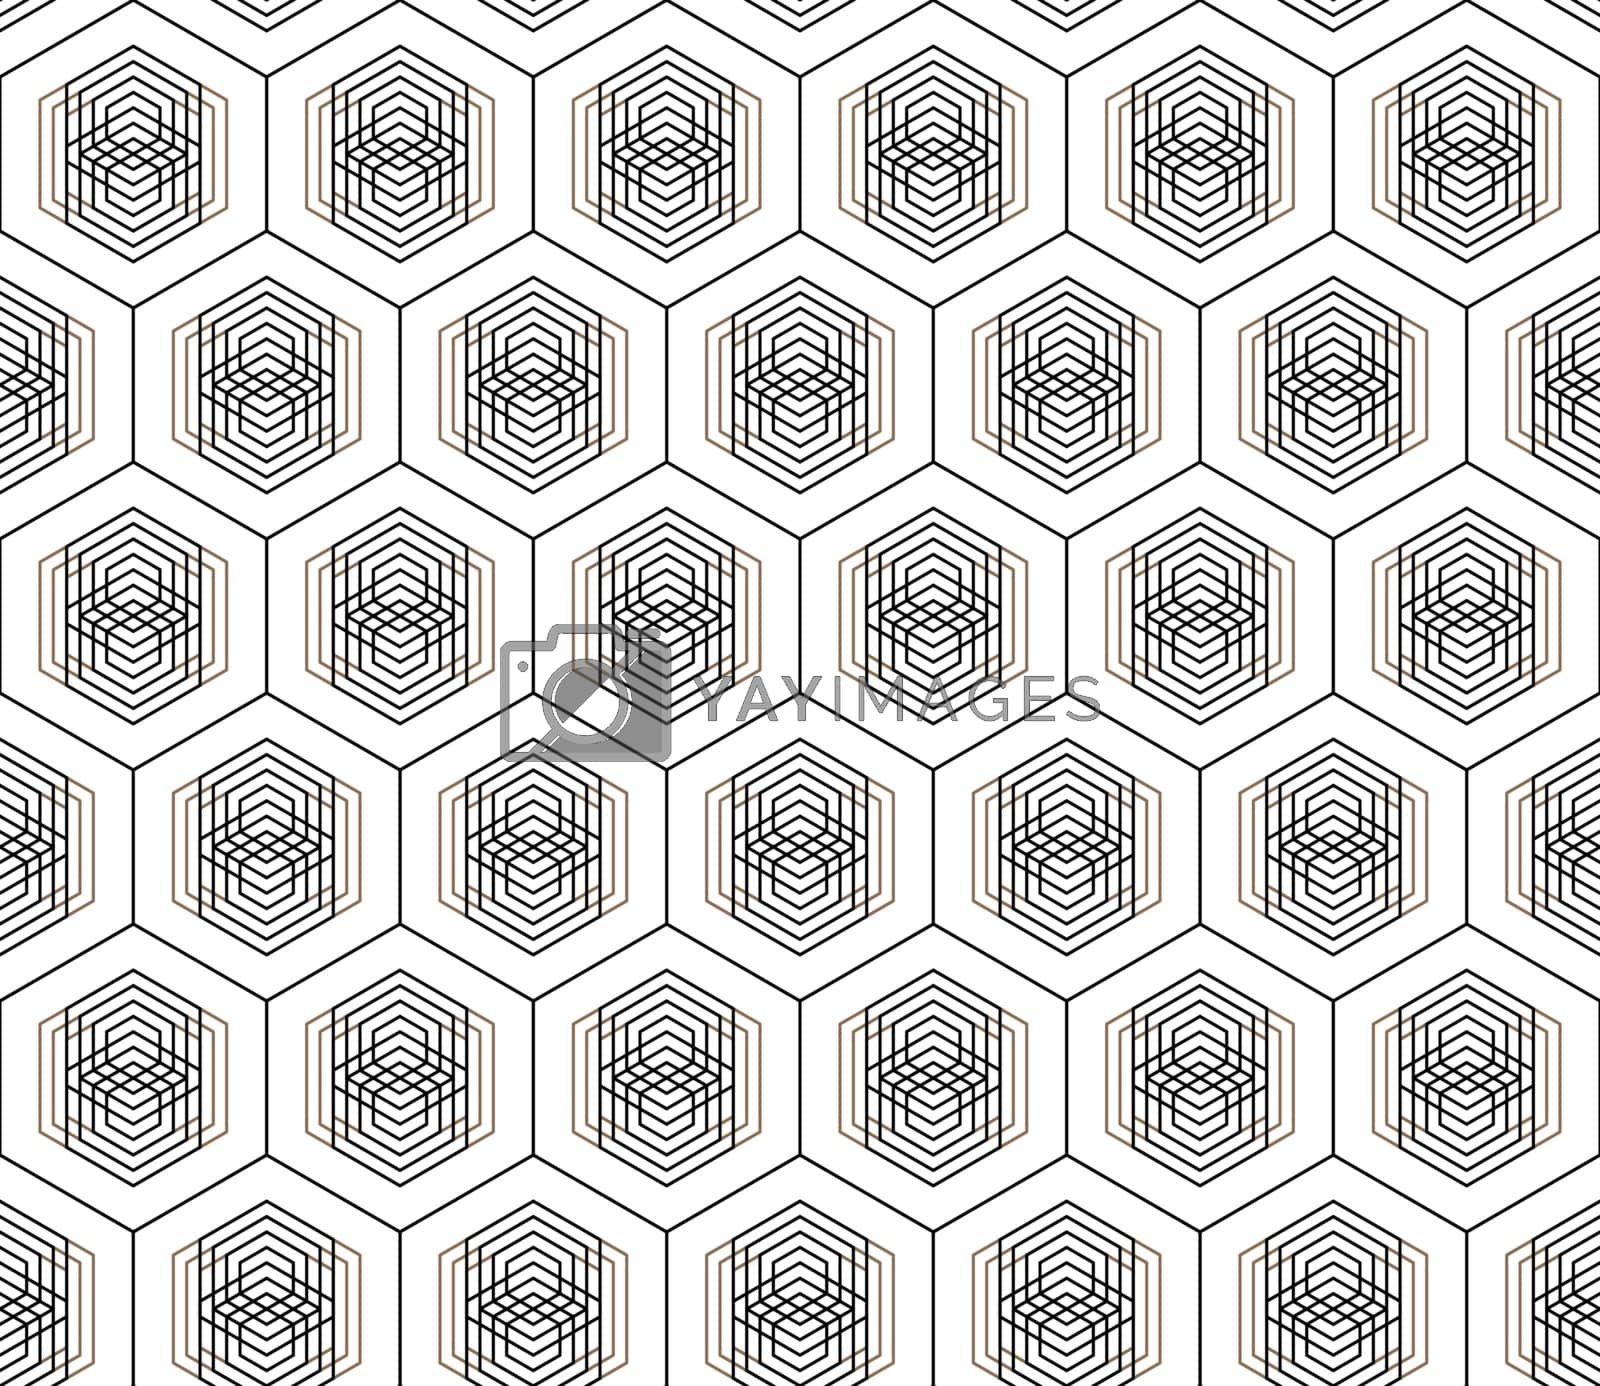 Royalty free image of Vector seamless geometric pattern. Classic Chinese ancient fully editable ornament by Softulka